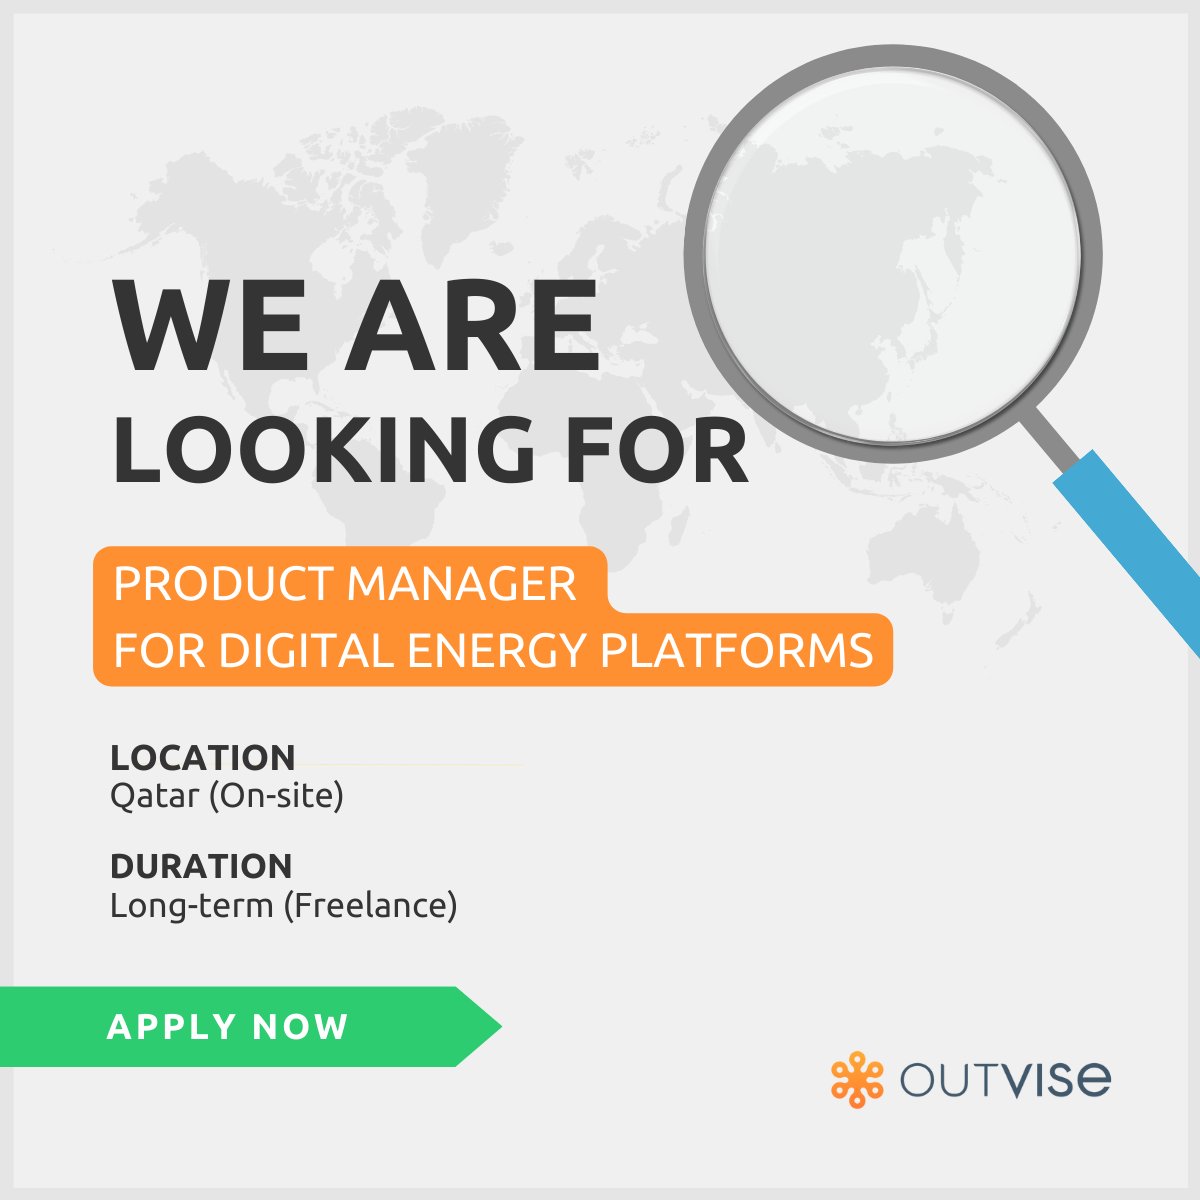 Our client is seeking an experienced Product Manager for Digital Energy Platforms. 🔎

Apply here 👉 outvise.com/sl/imJ-mQpnFe

#OutviseProjects #Freelance #Hiringnow #MiddleEast